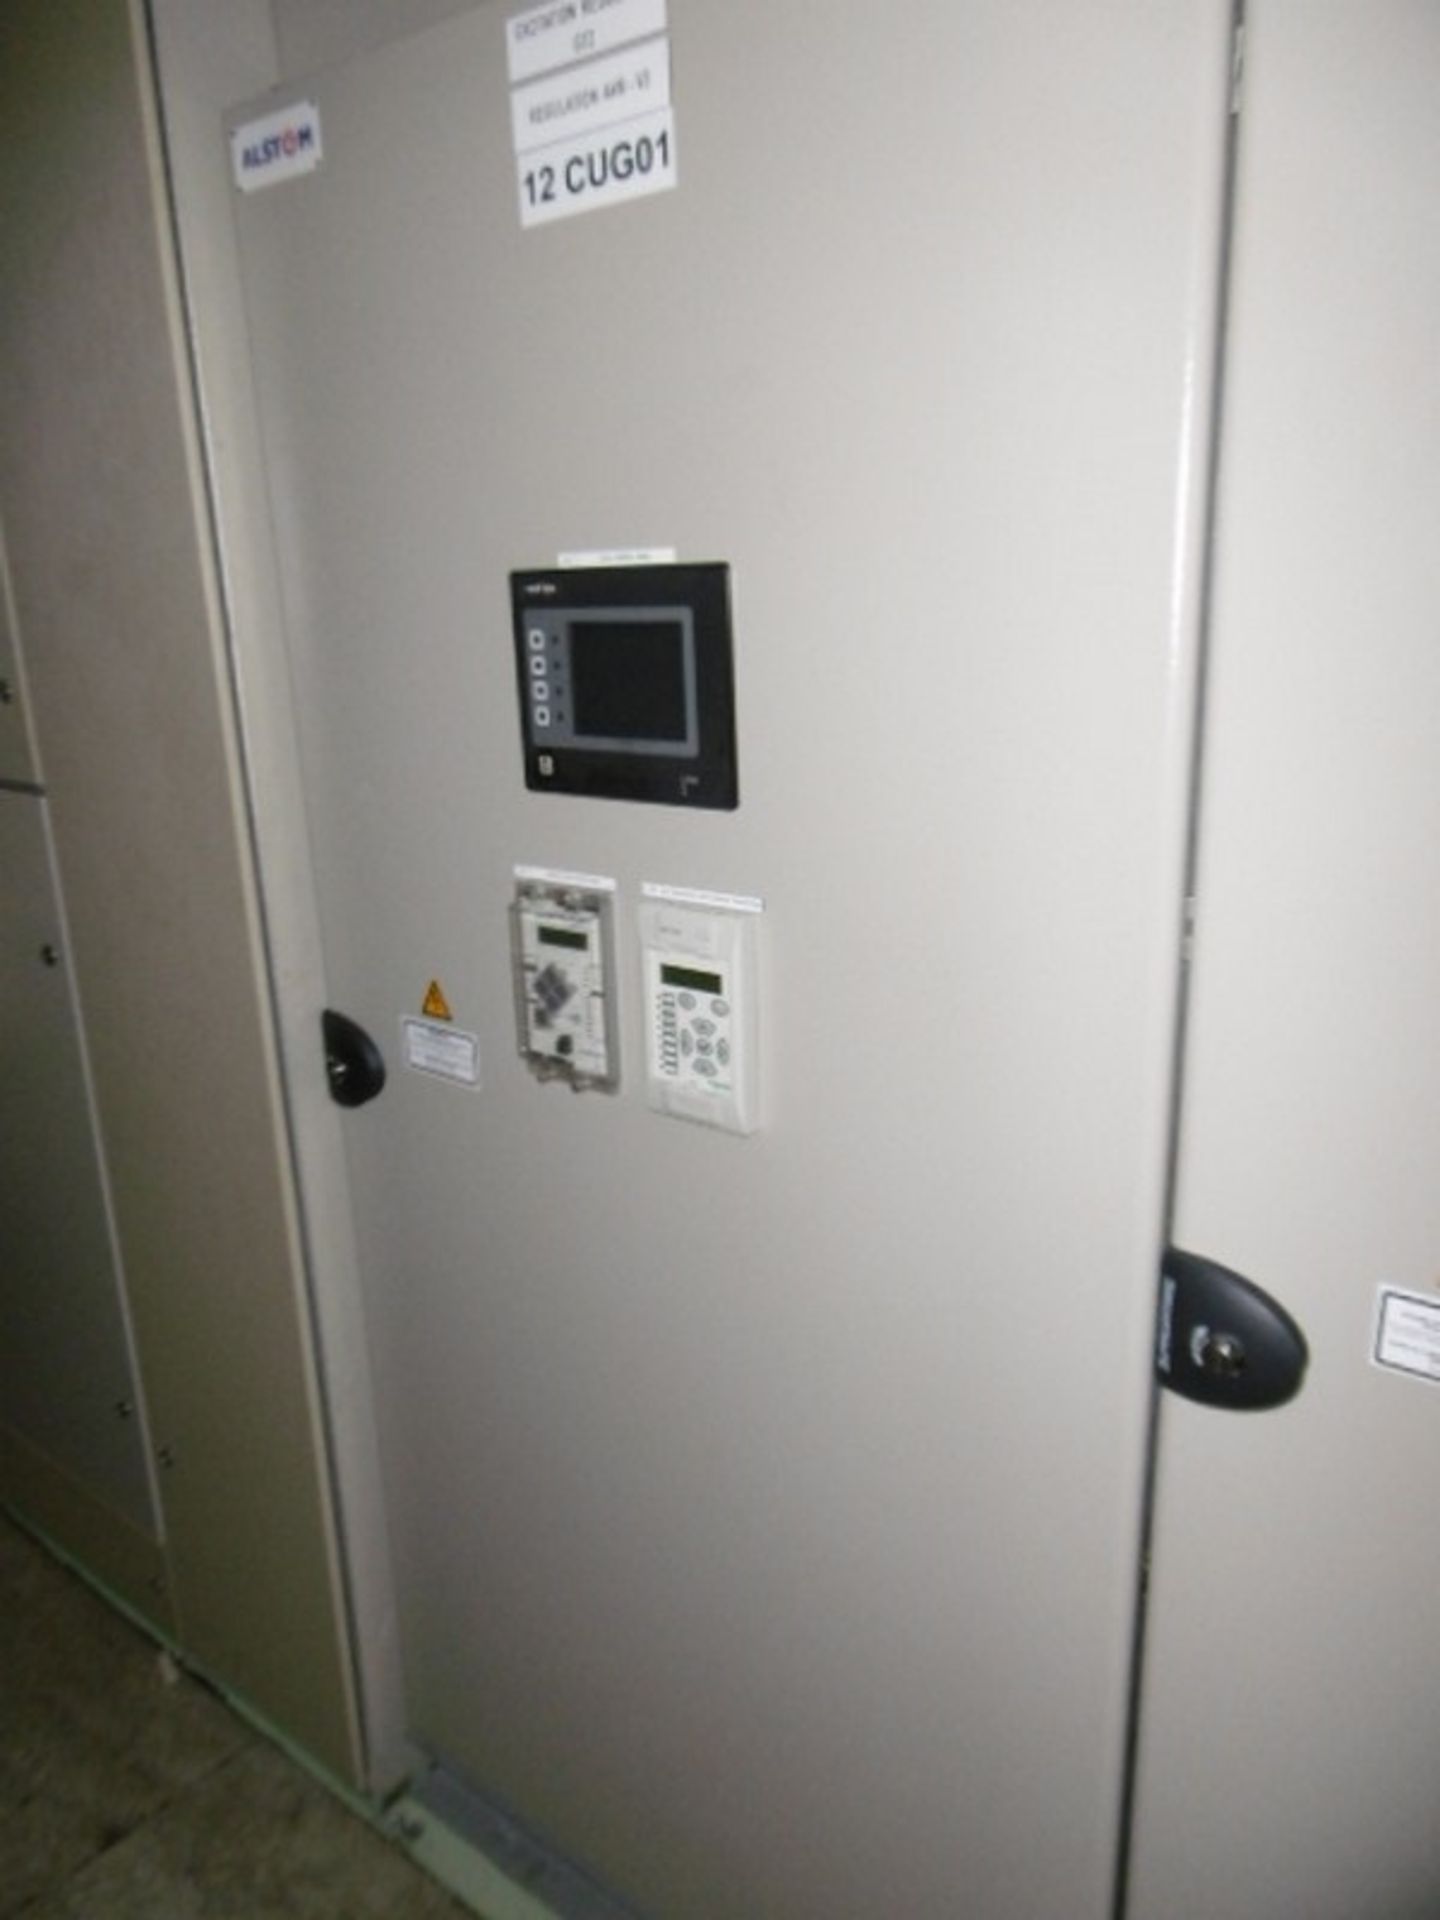 Large Qty Switchgear - From Gas Turbine 2 Control Module Building - Image 26 of 36